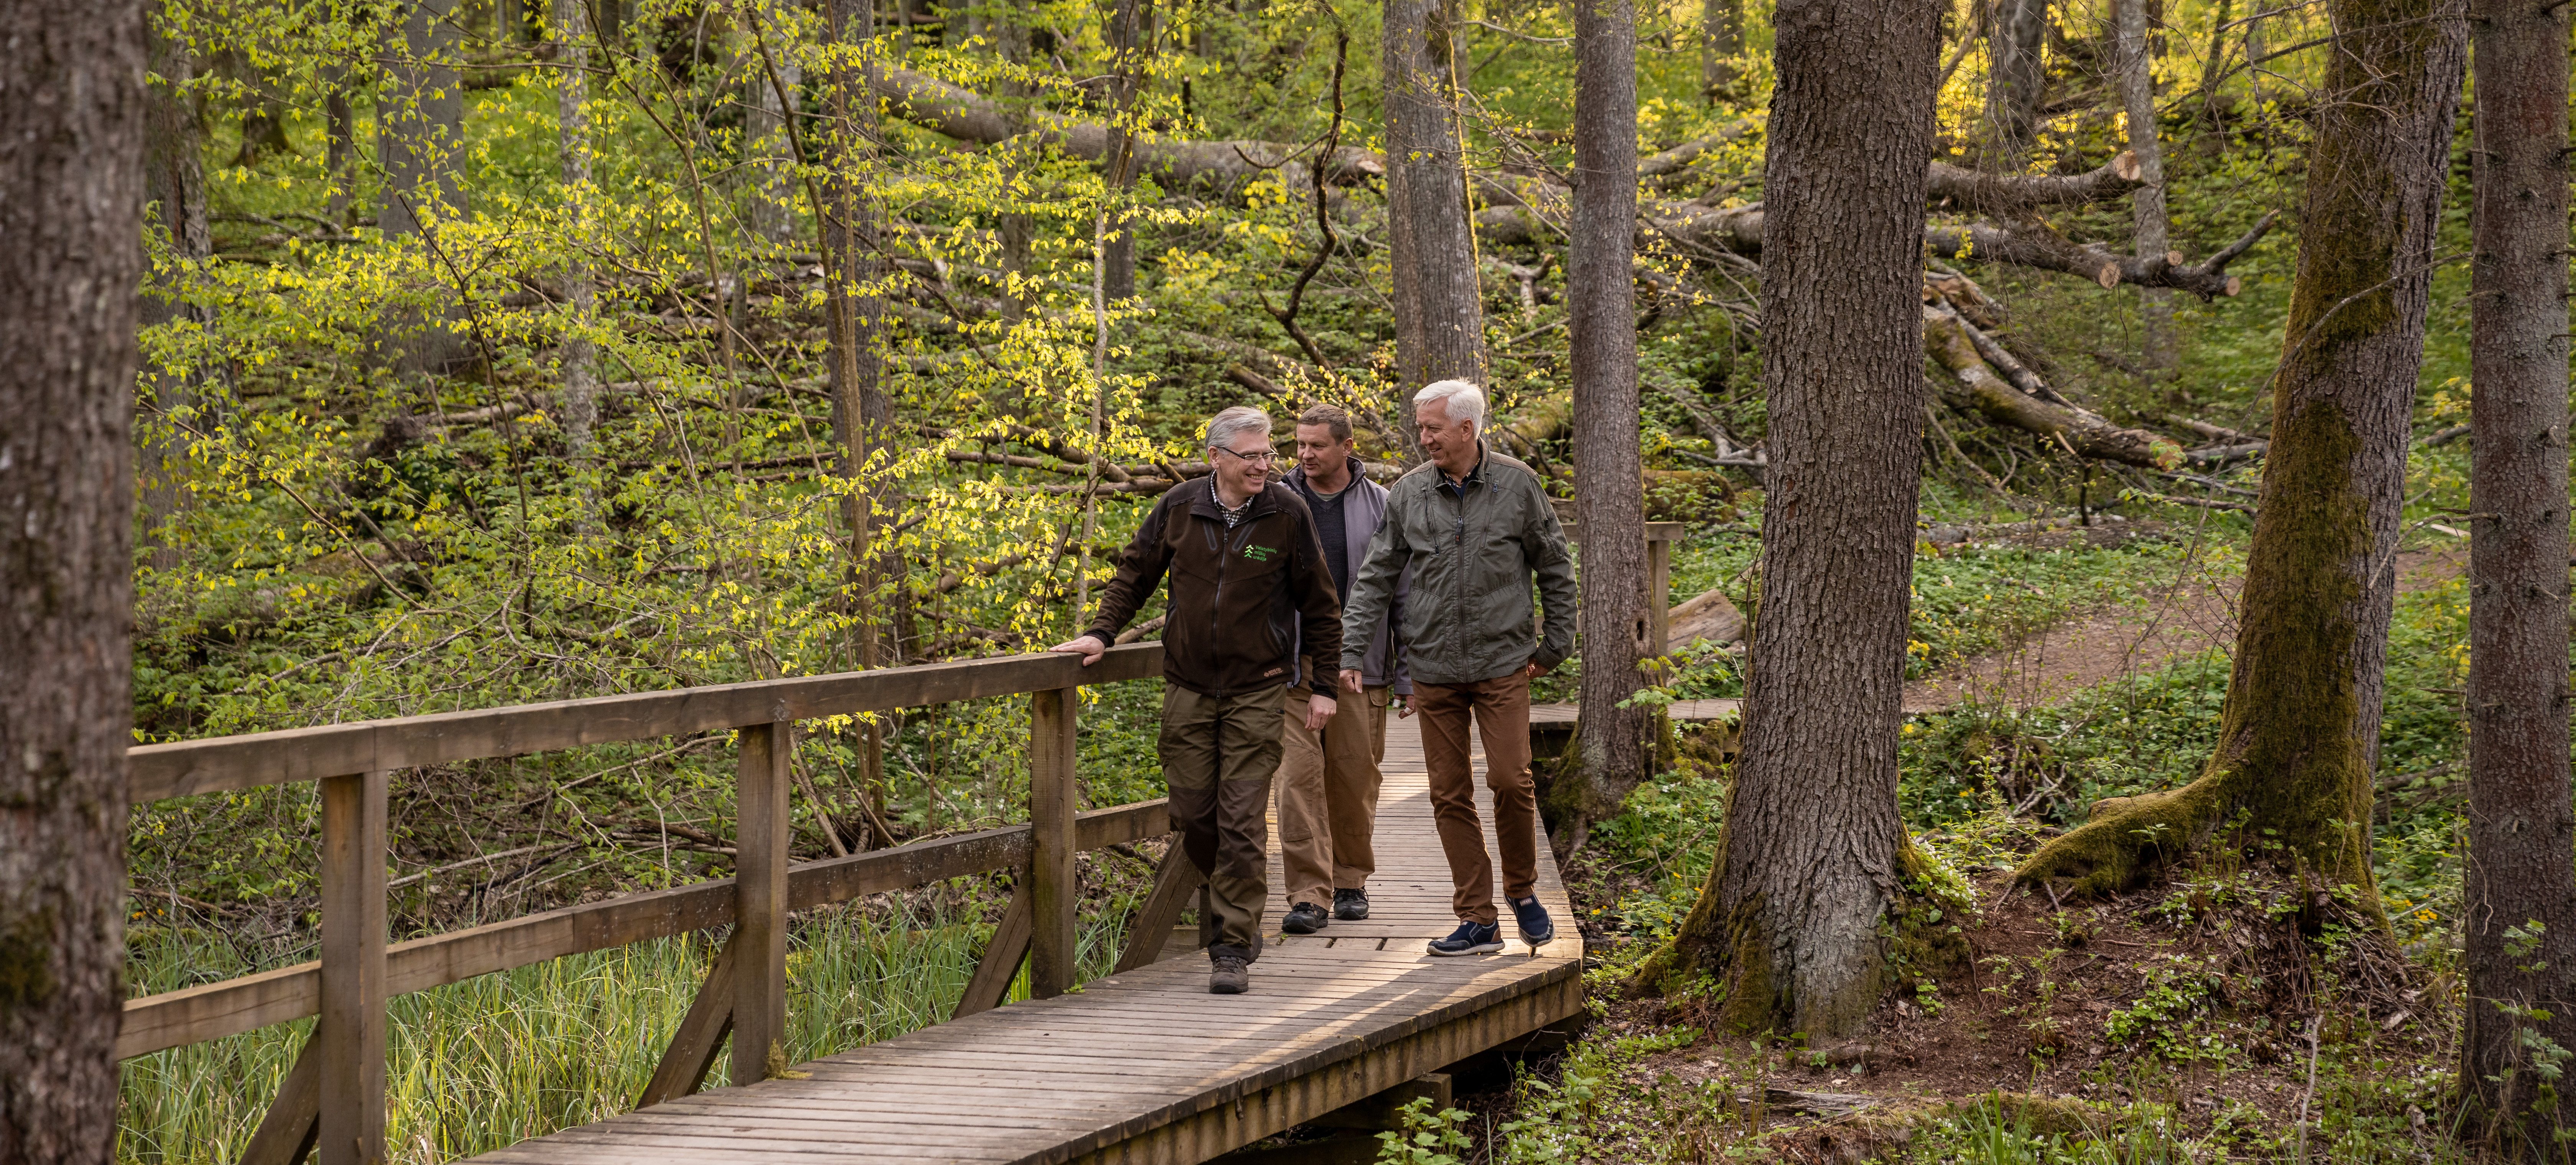 three forest managers walking over a wooden bridge in a forest